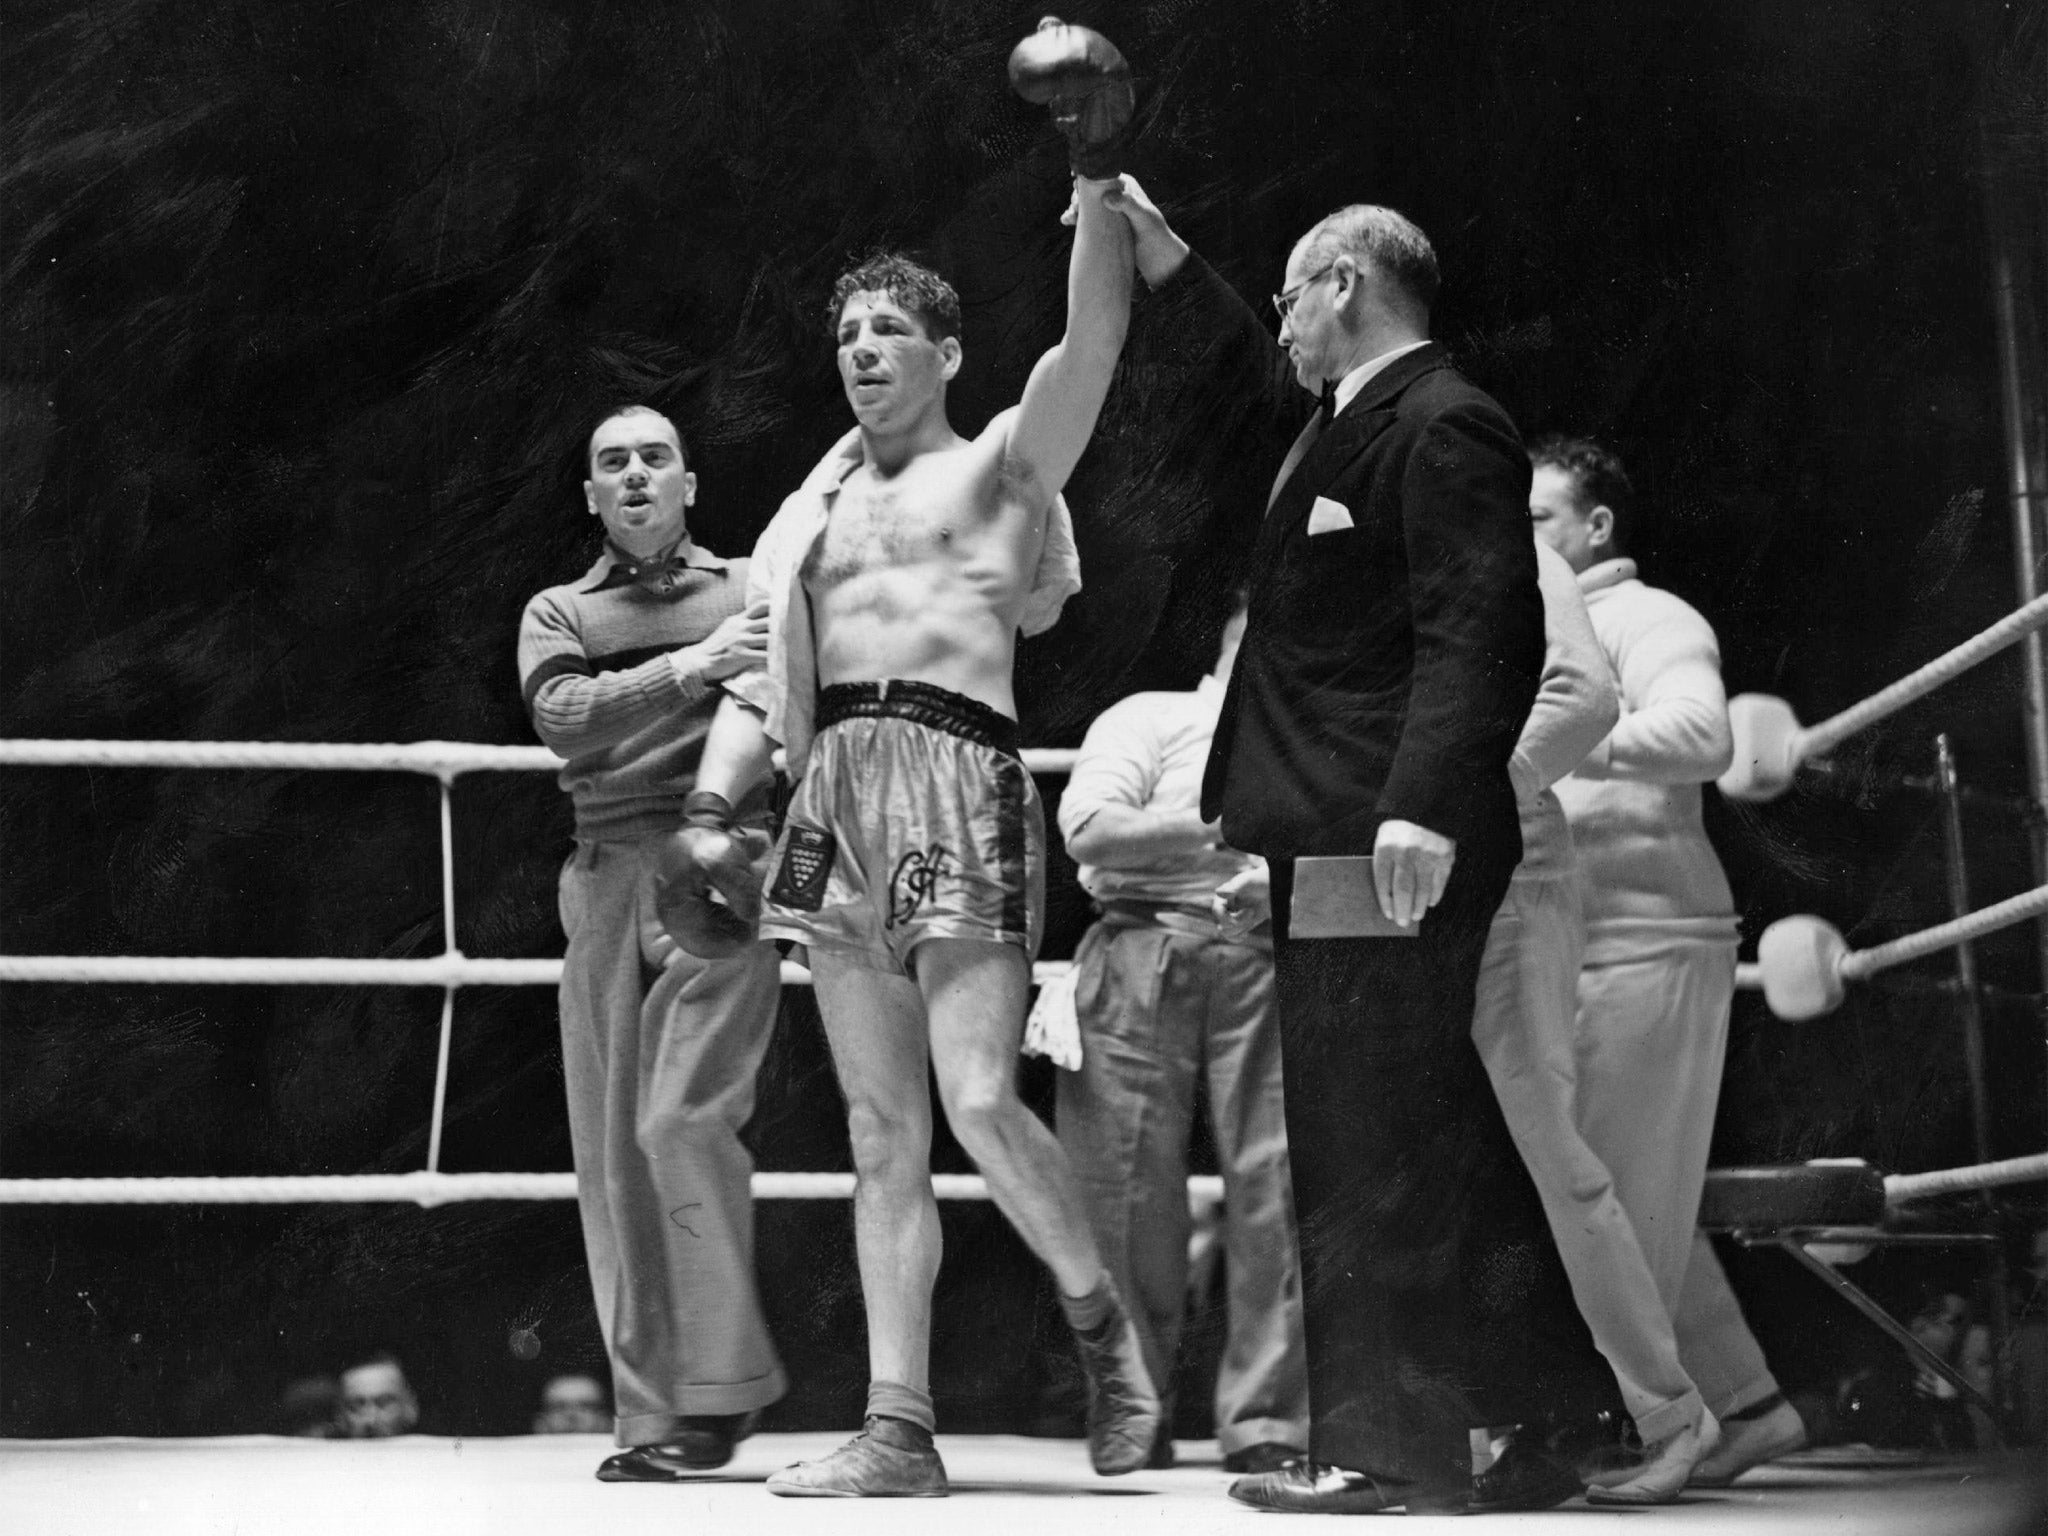 Len Harvey after beating Jock McAvoy in 1939, a fight some reports claim was watched by 200,000 people at the White City Stadium